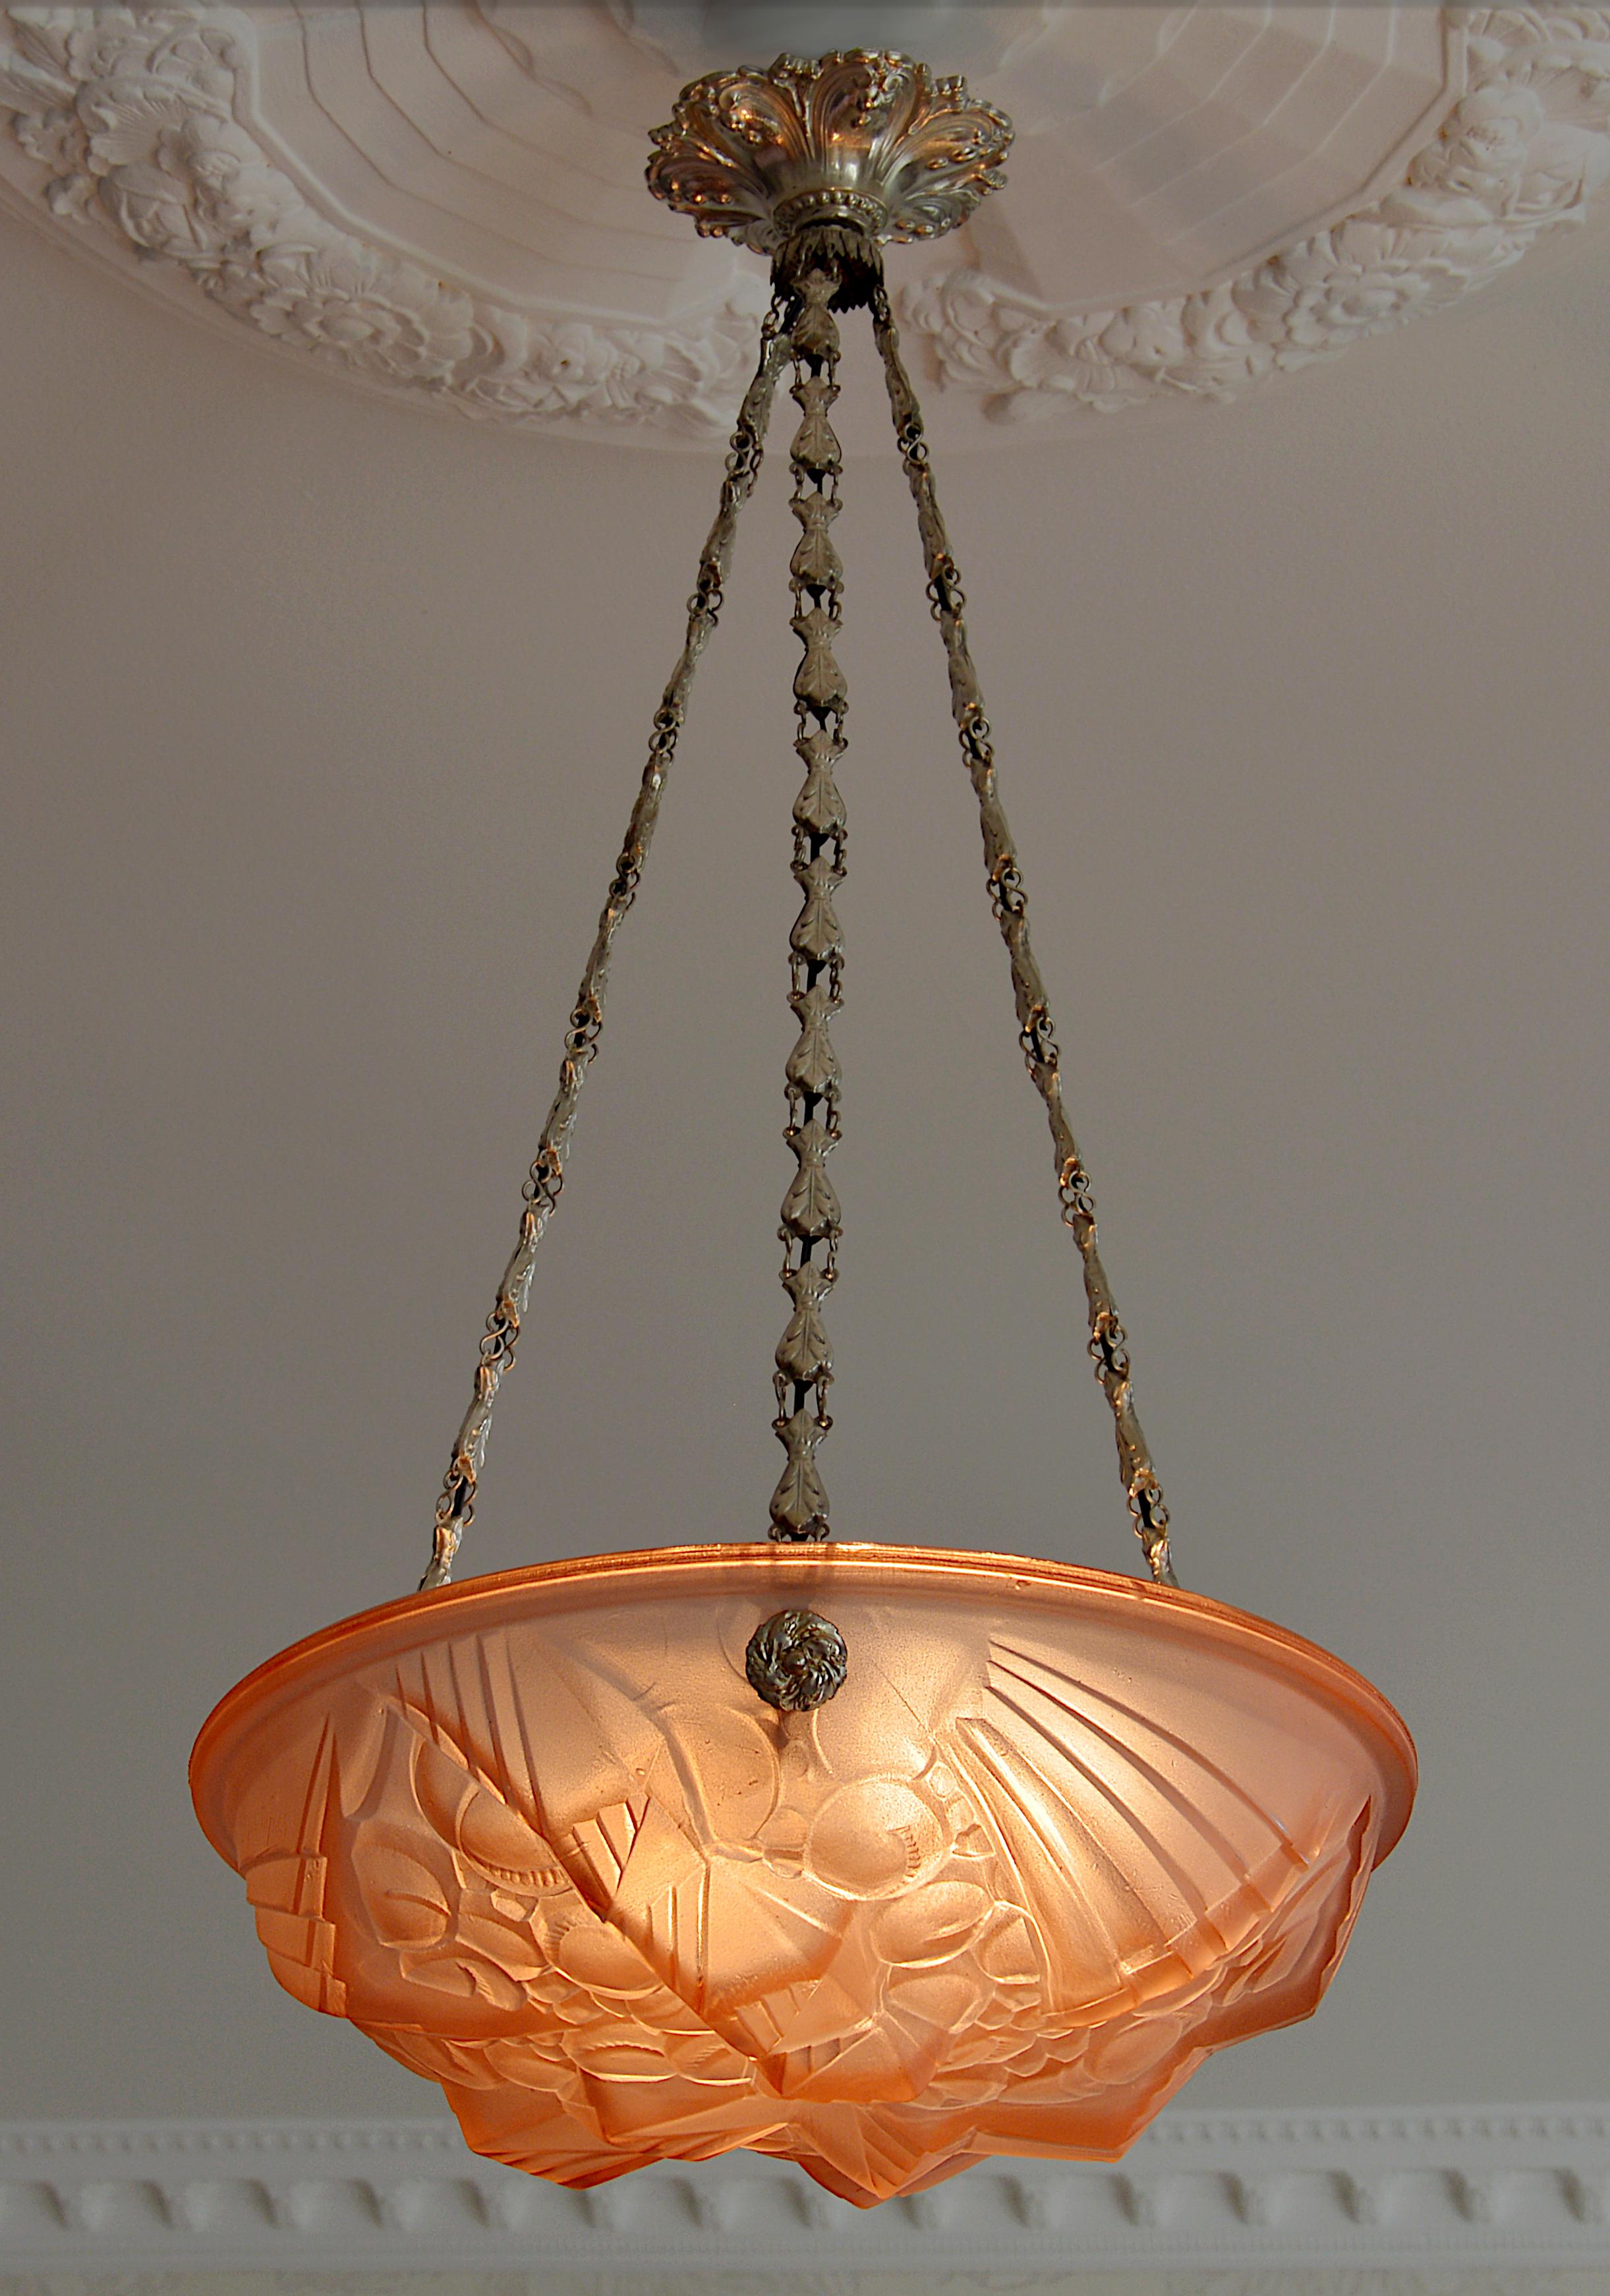 Superb French Art Deco pendant chandelier by Mouynet (Paris), France, late 1920s. Pink frosted glass shade with a stylized Art Deco pattern. Silver plated stamped brass fixture. Measures: Height 27